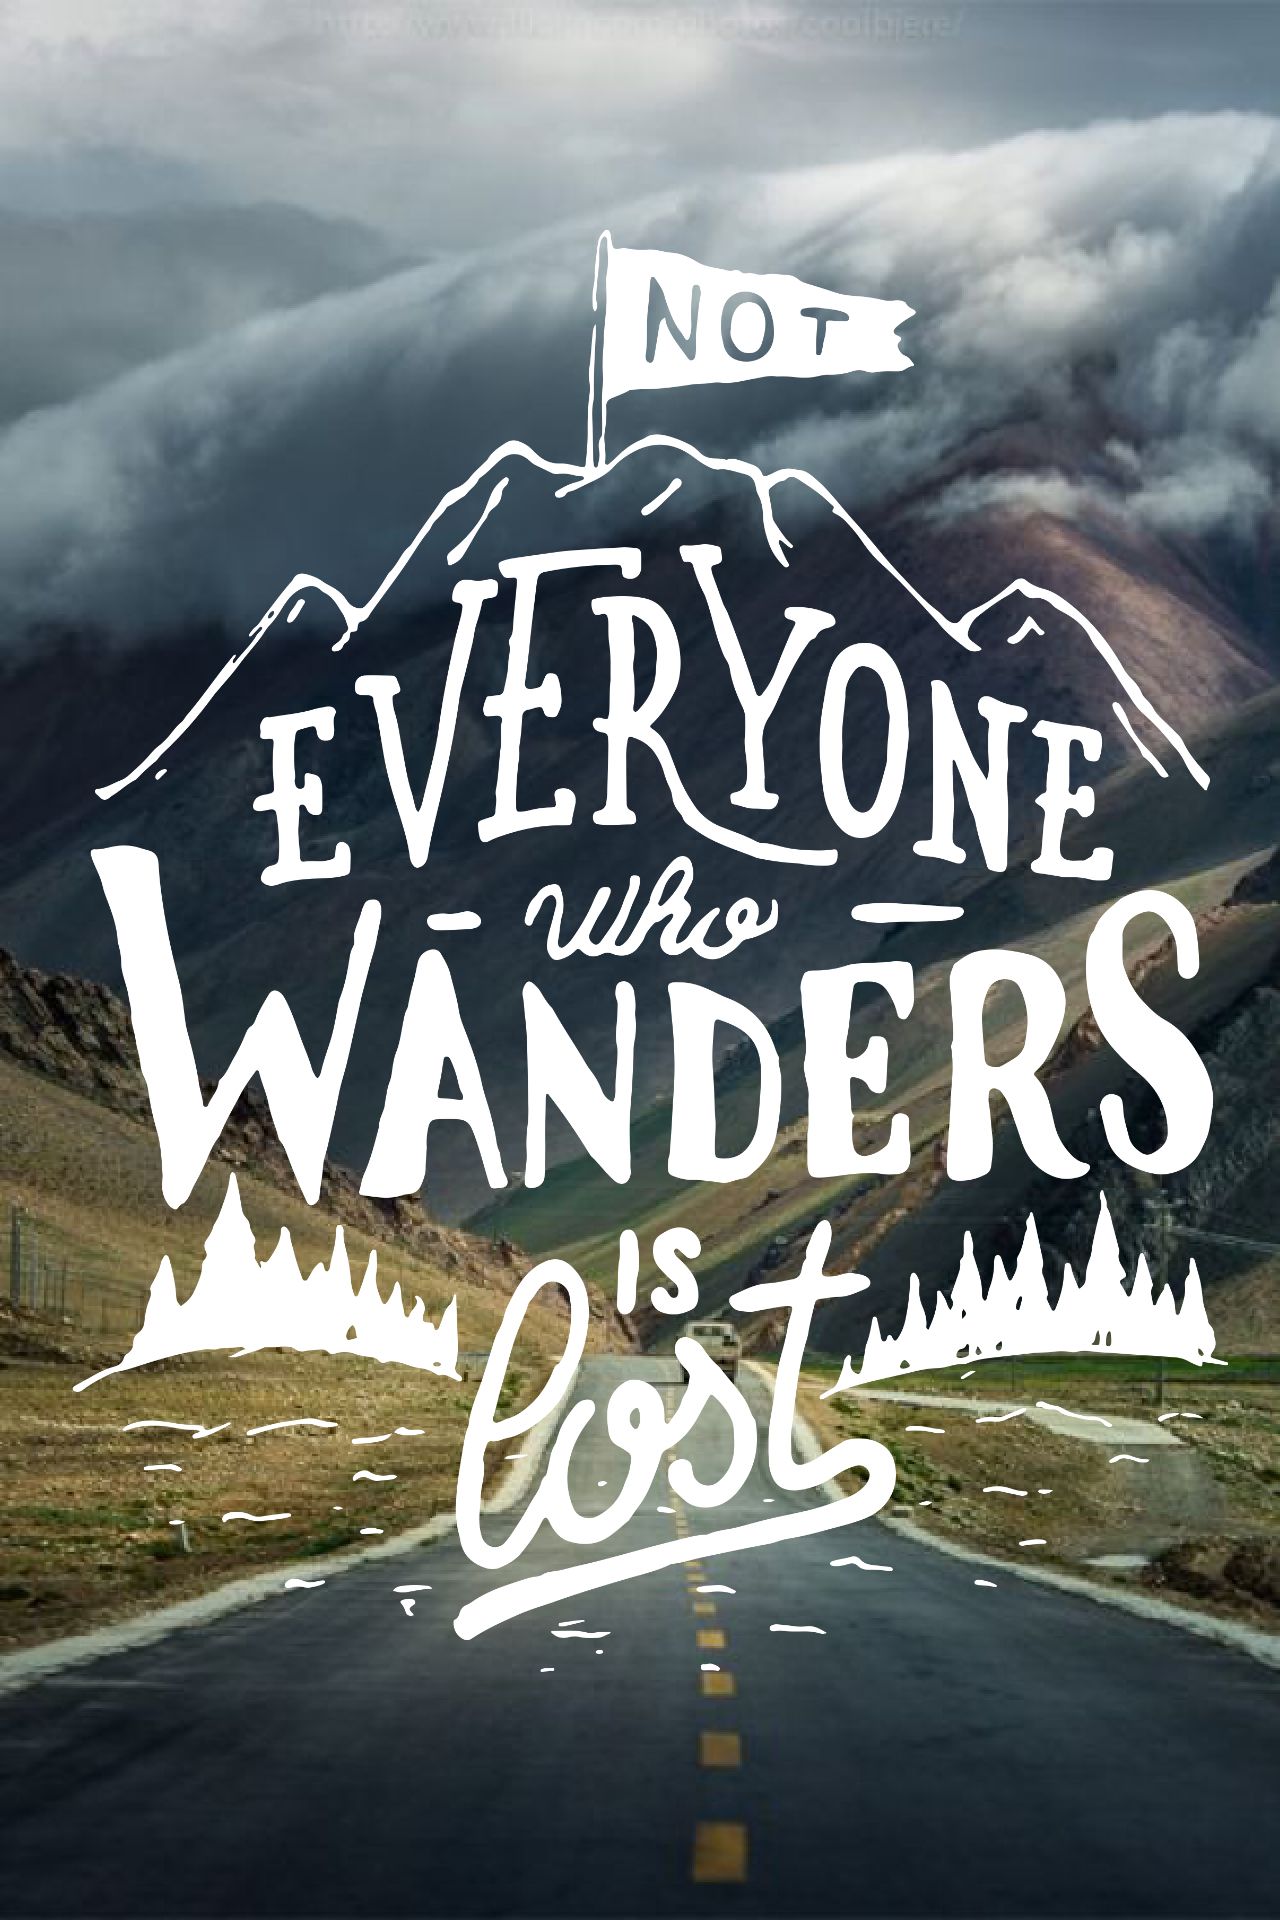 Not All Those Who Wander Are Lost Made With Piclab HD Words